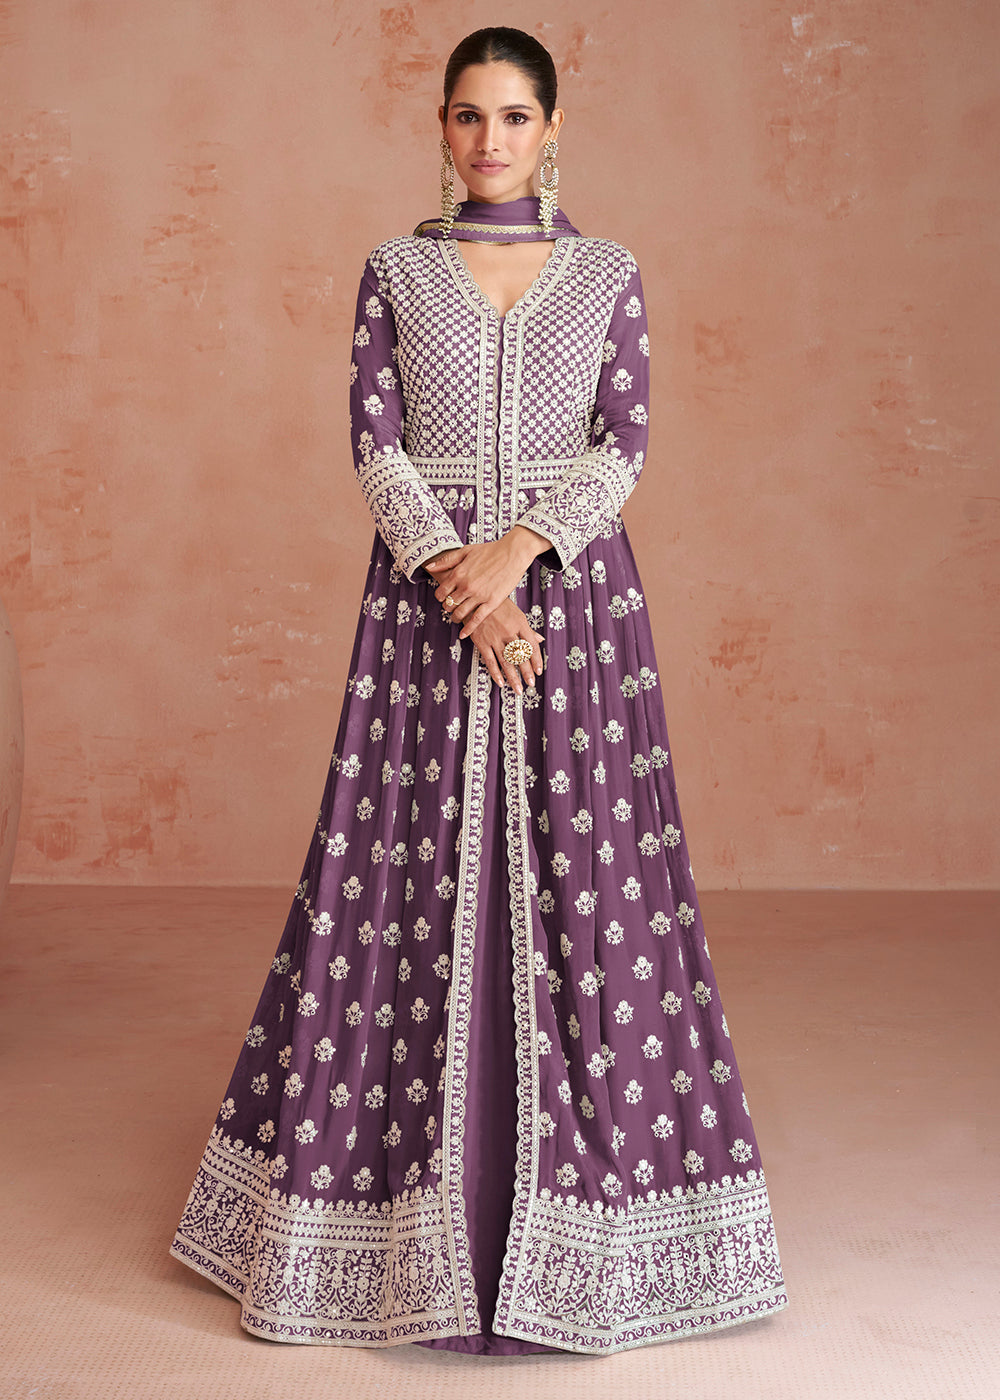 Buy Now Plum Purple Slit Style Embroidered Georgette Skirt Anarkali Suit Online in USA, UK, Australia, New Zealand, Canada, Italy & Worldwide at Empress Clothing.